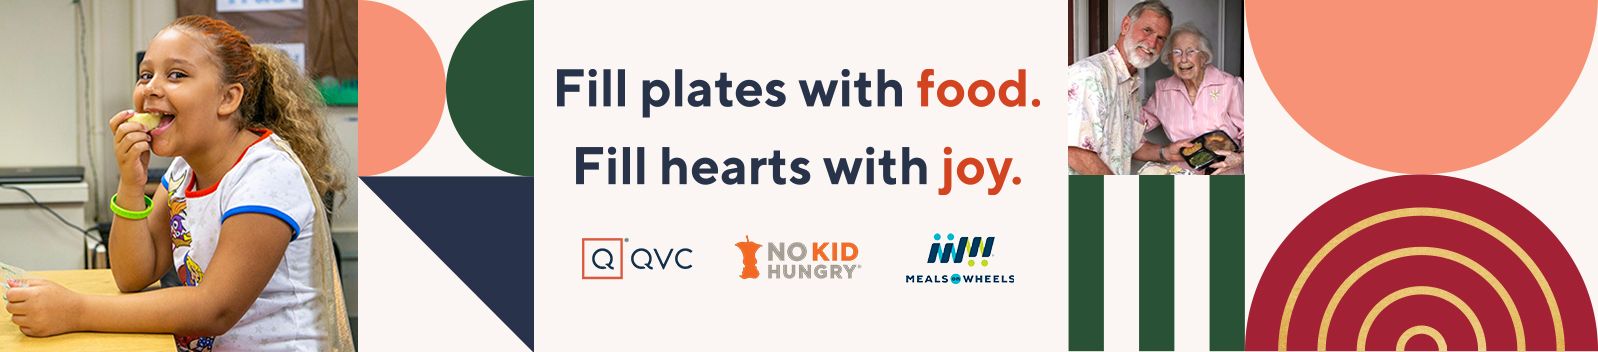 QVC® + No Kid Hungry + Meals on Wheels - Let’s fill plates with food—and fill hearts with joy.